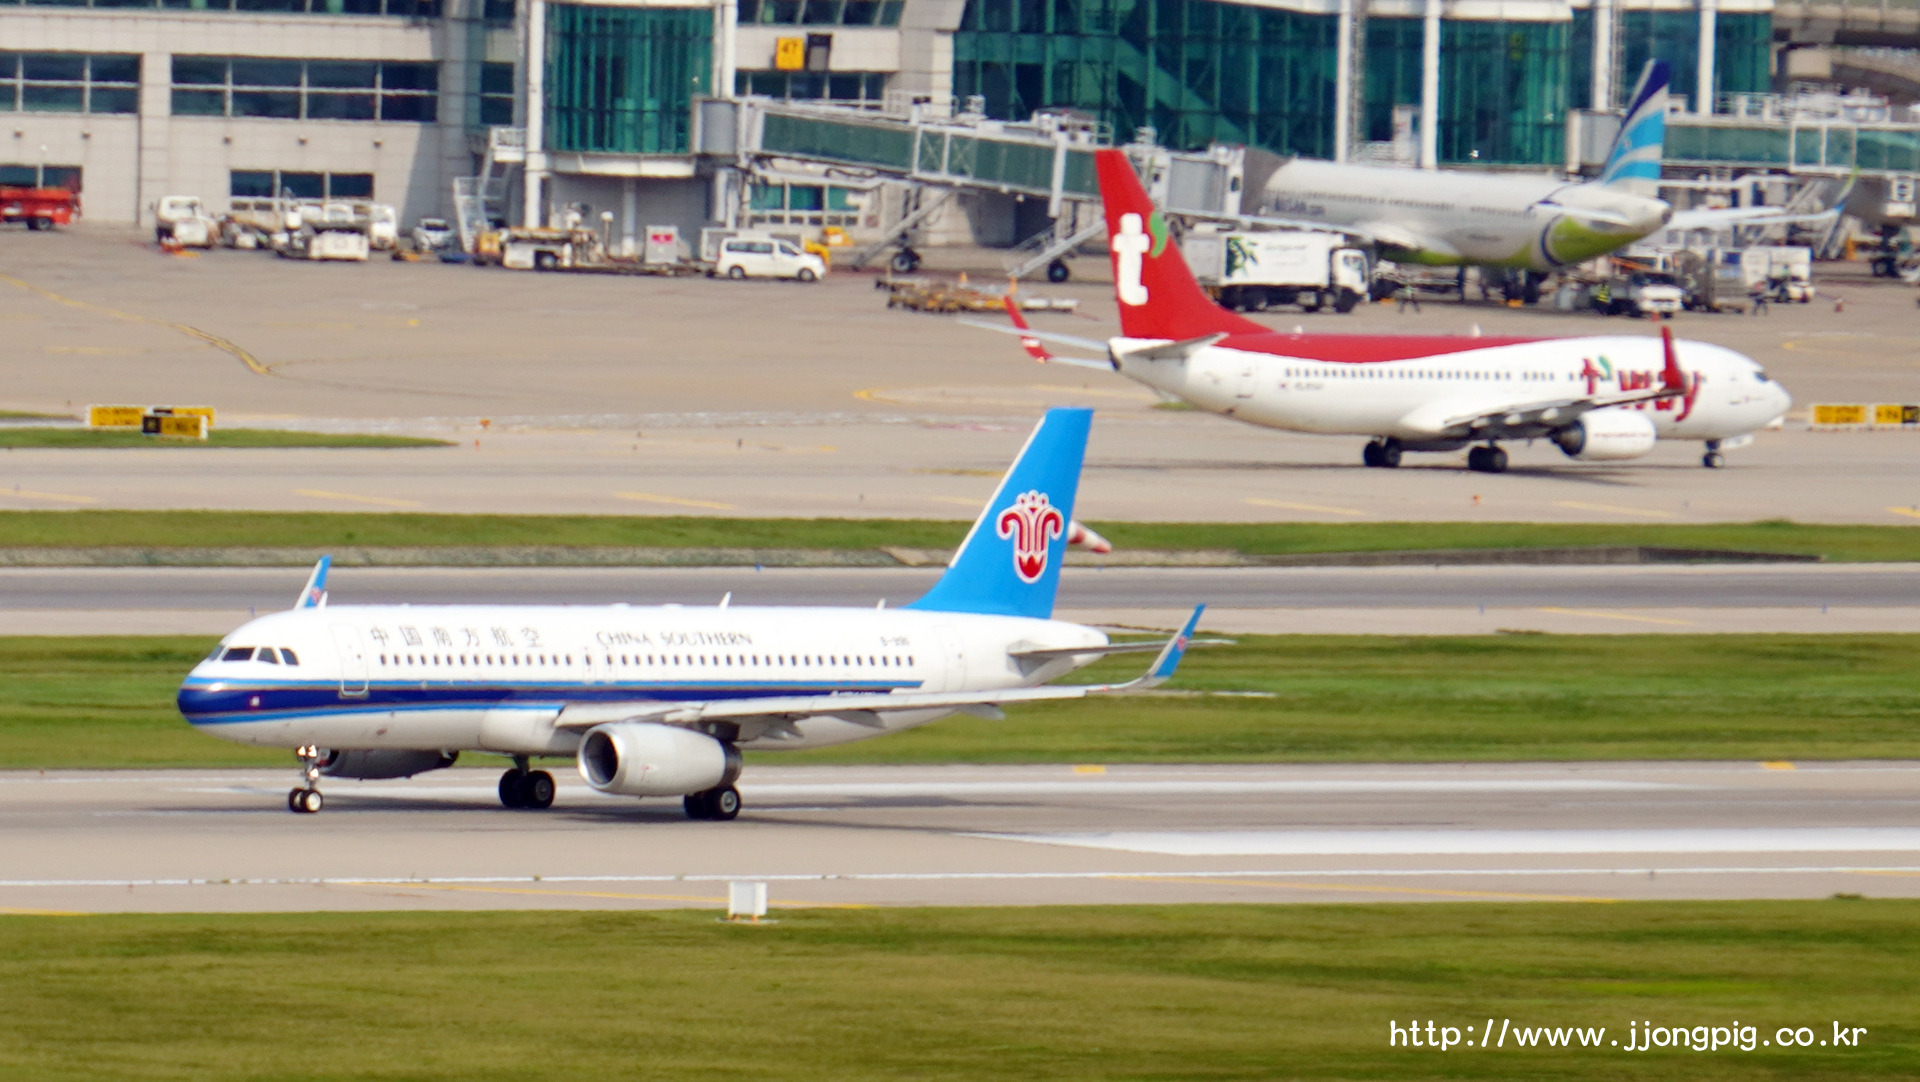 China Southern Airlines B-9911 Airbus A320-200